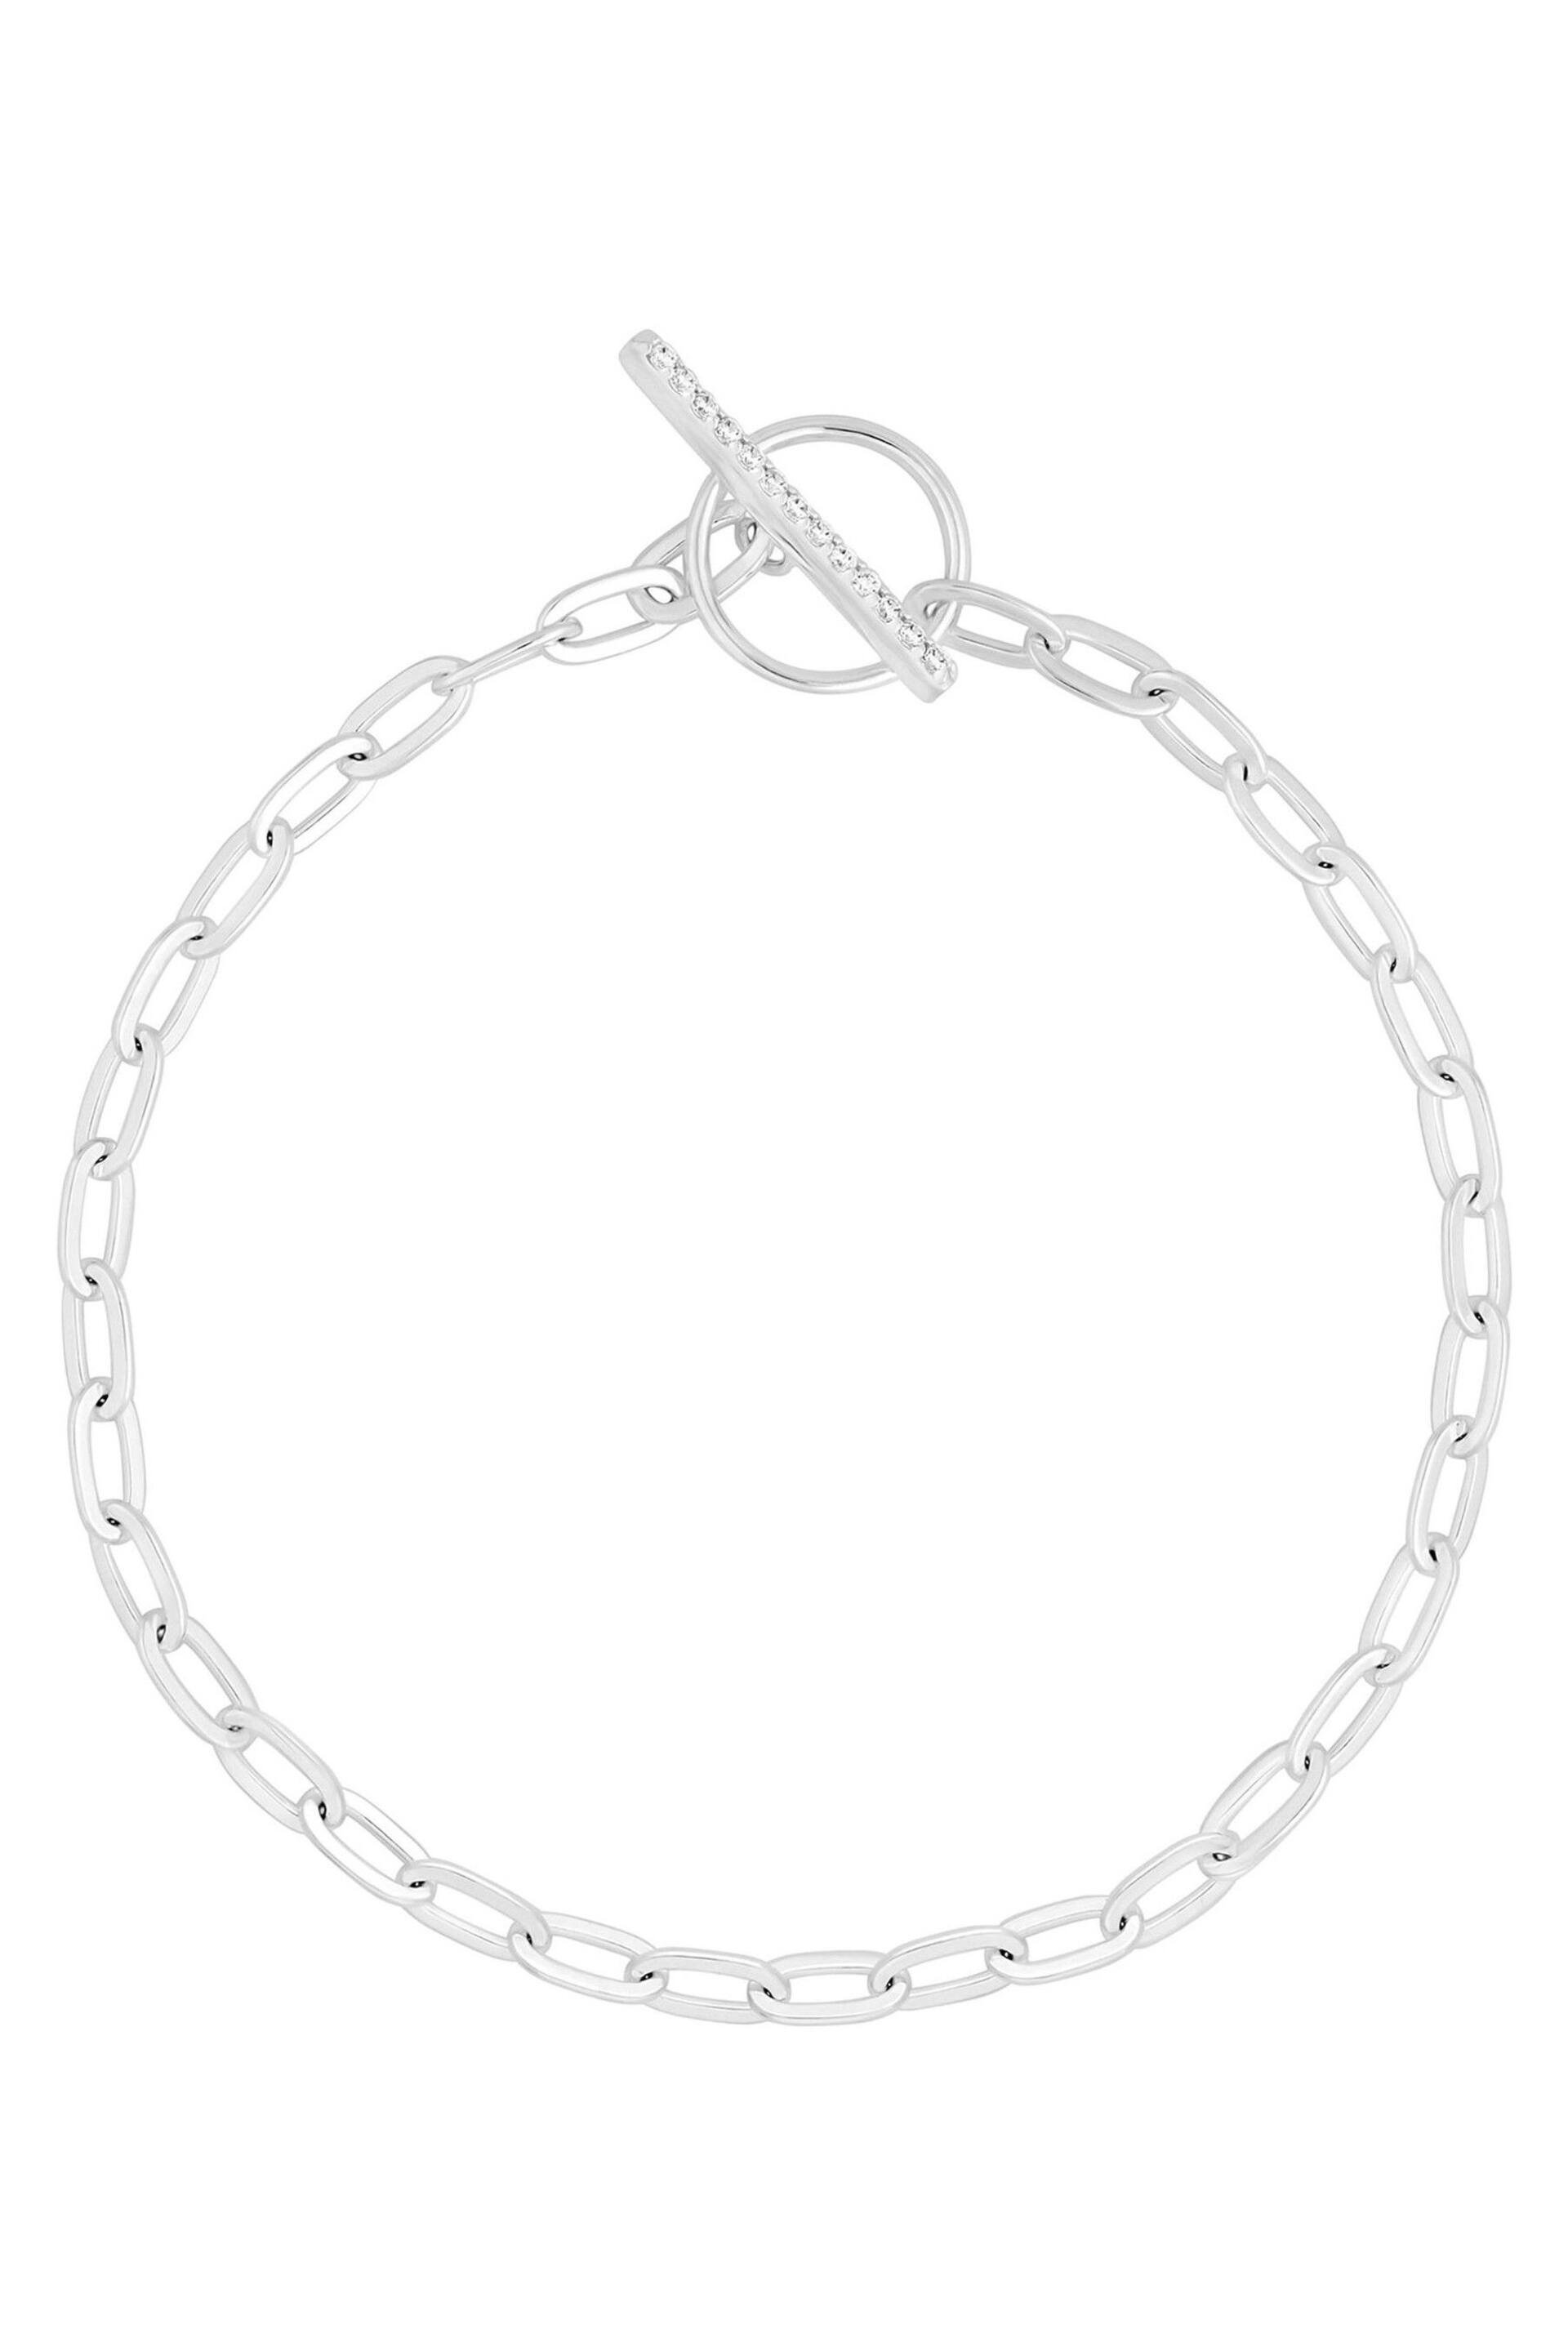 Simply Silver Silver Tone Polished And Pave T-Bar Bracelet - Image 1 of 4